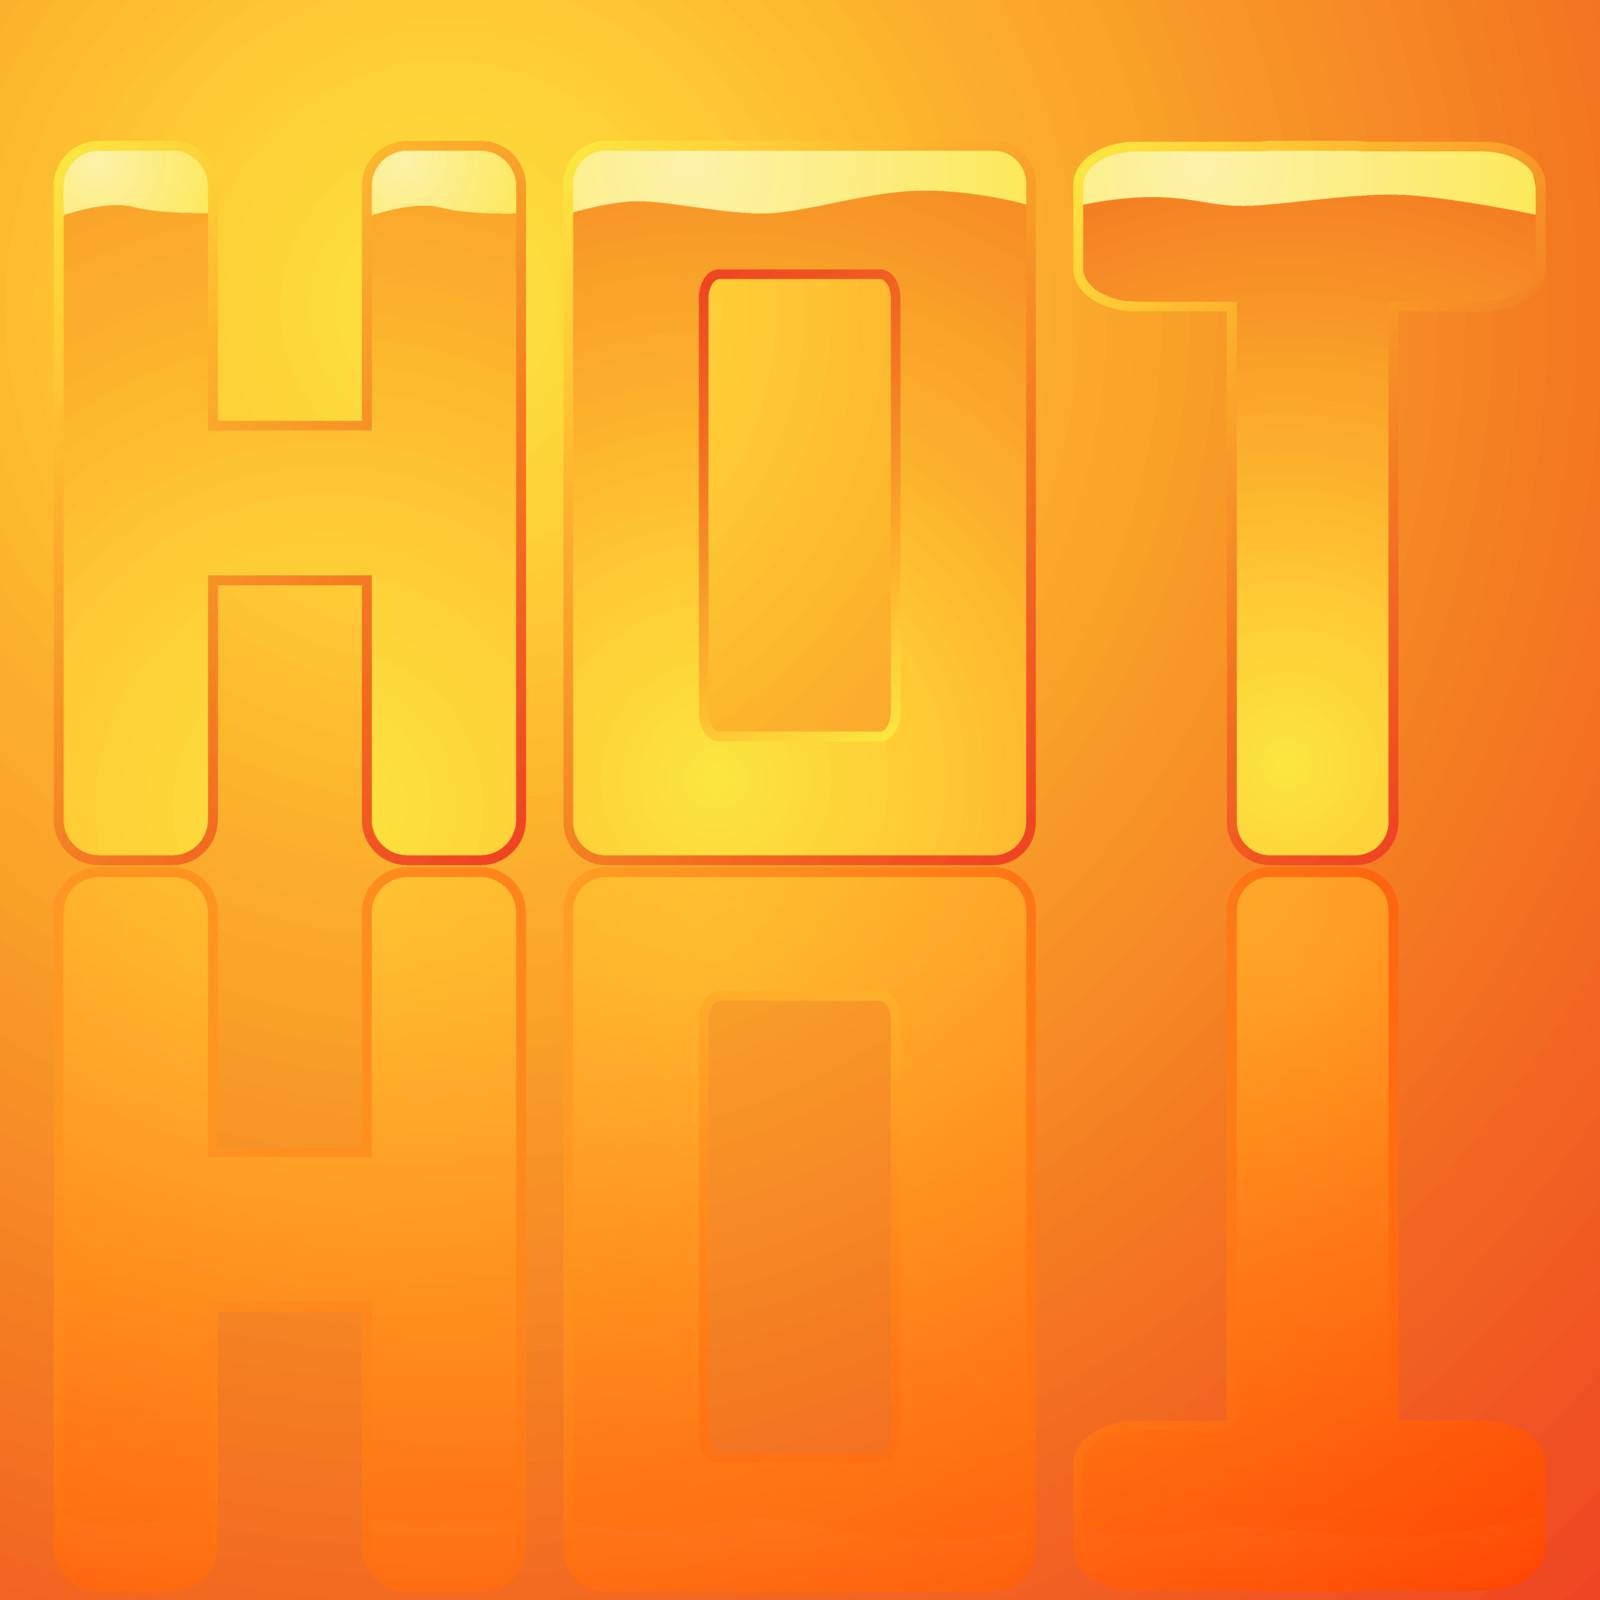 Hot by bruno1998